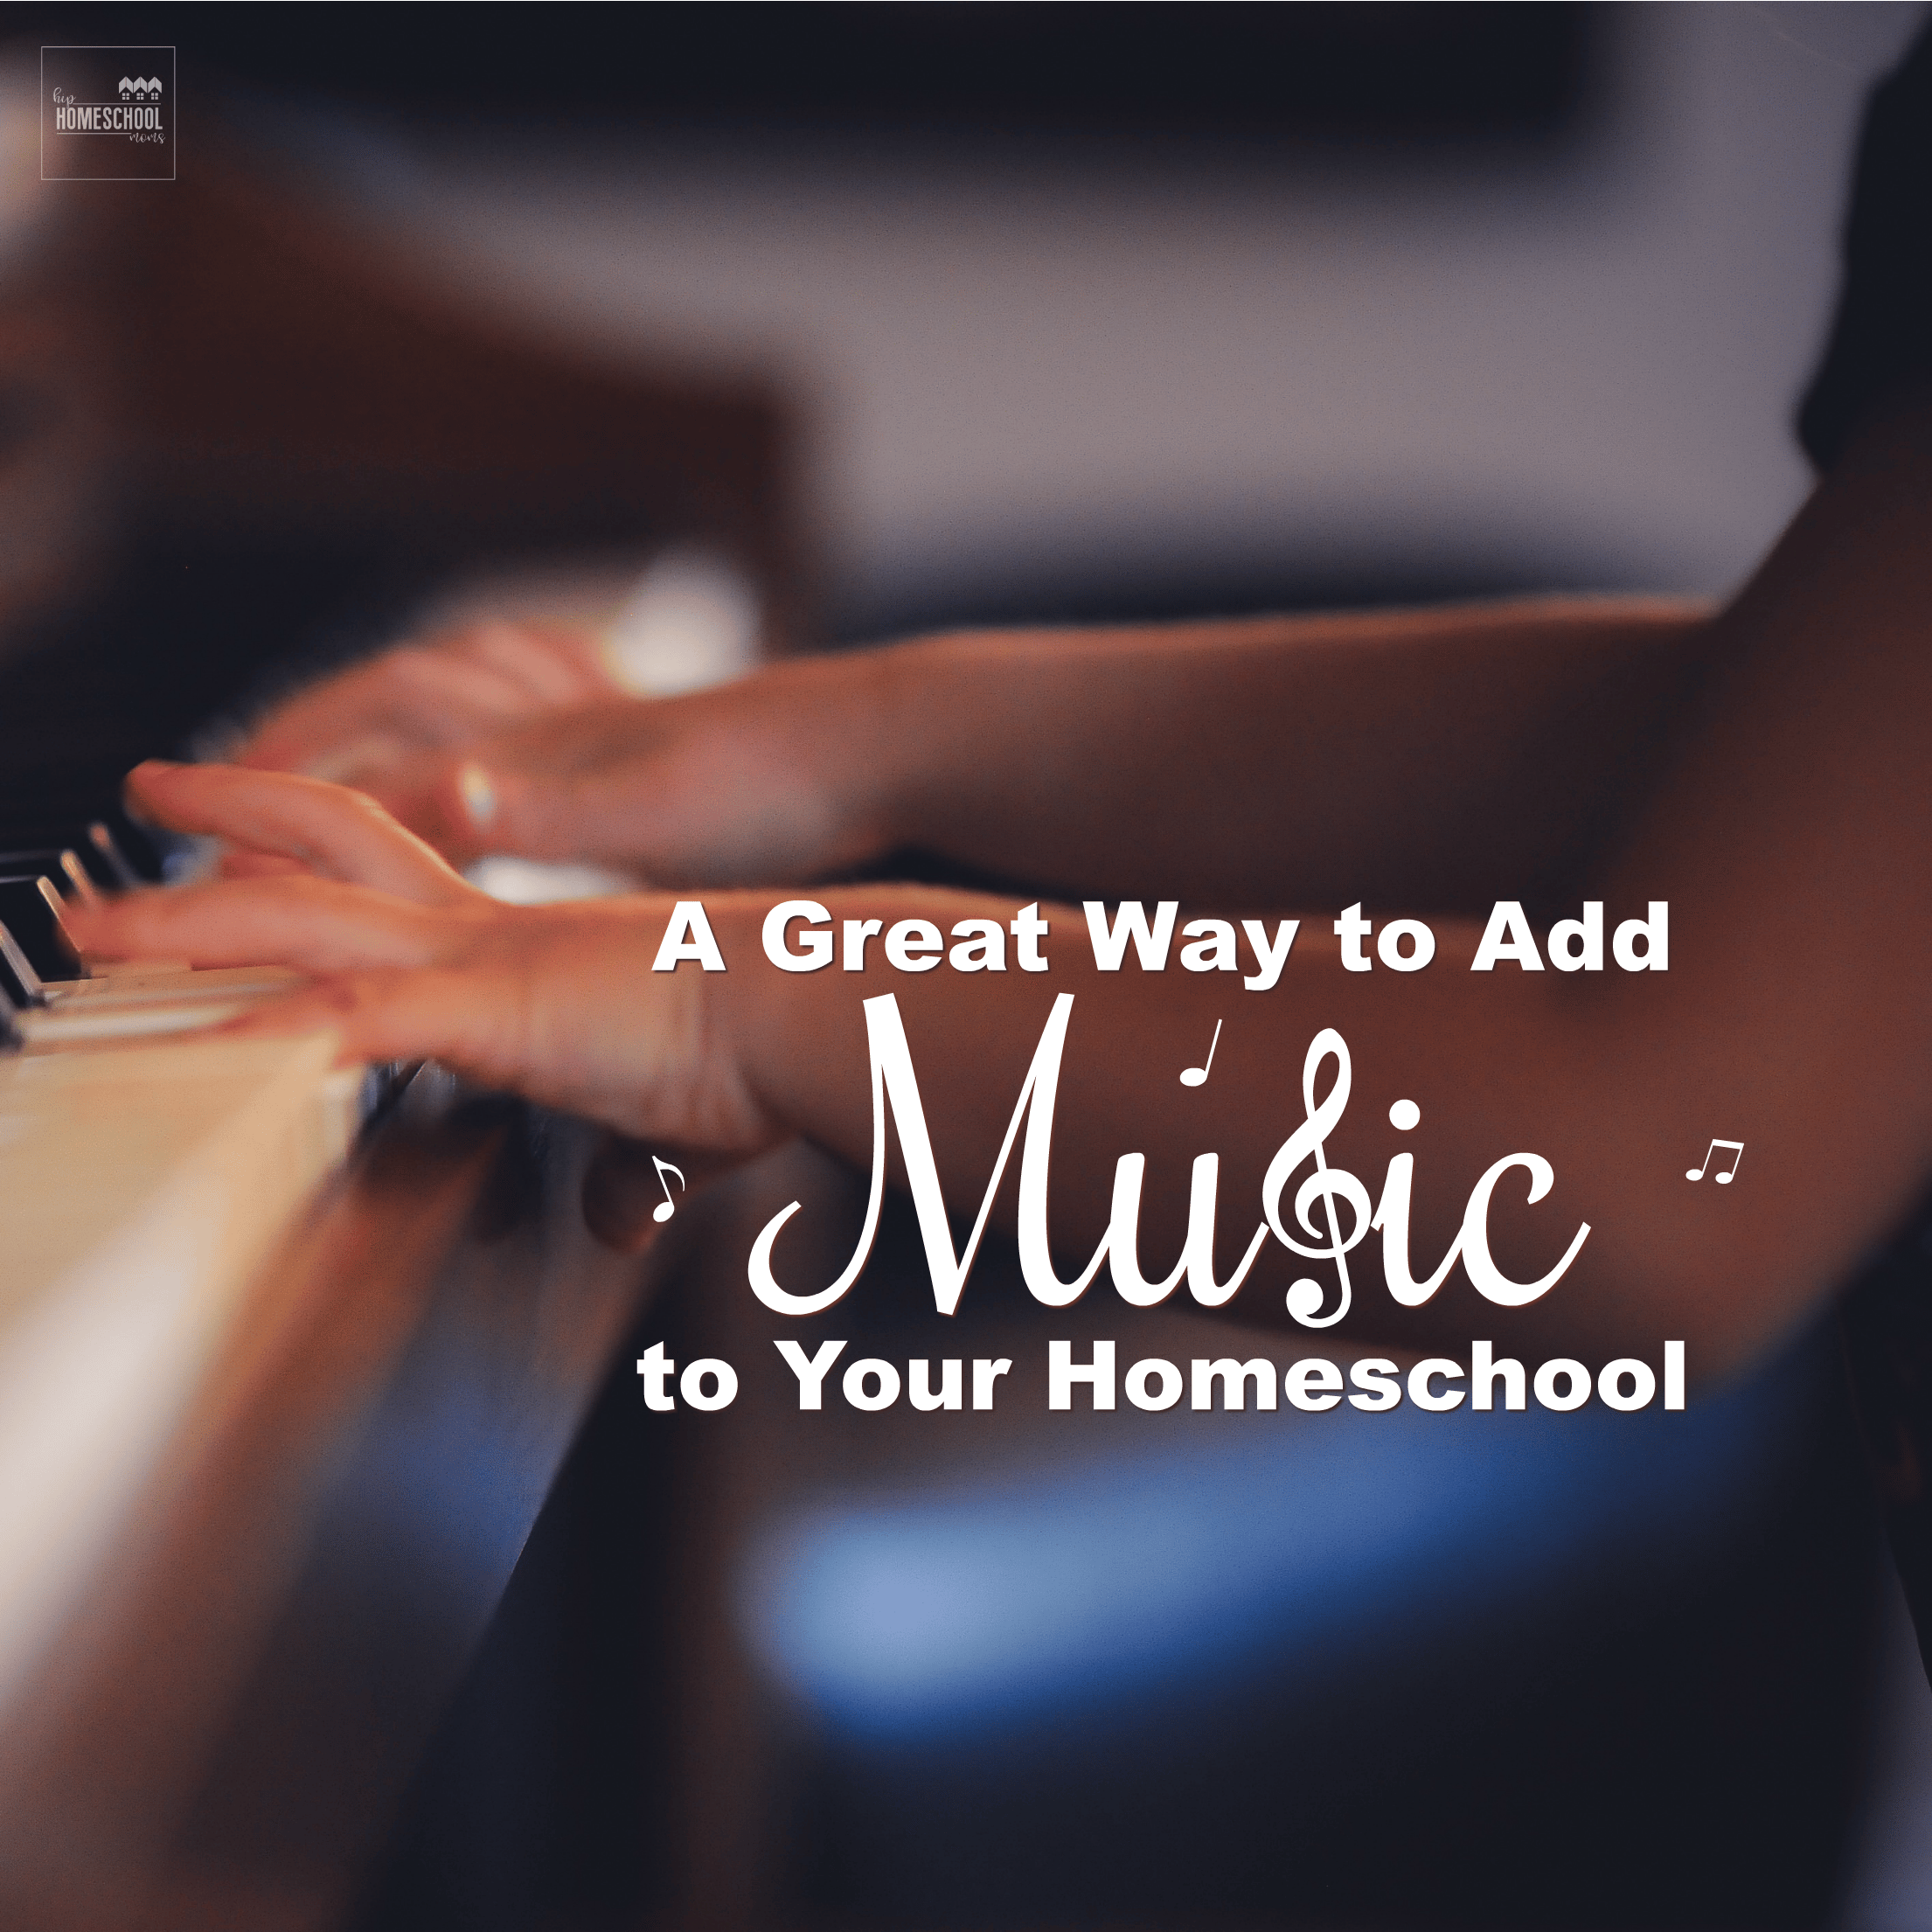 A Great Way to Add Music to Your Homeschool!